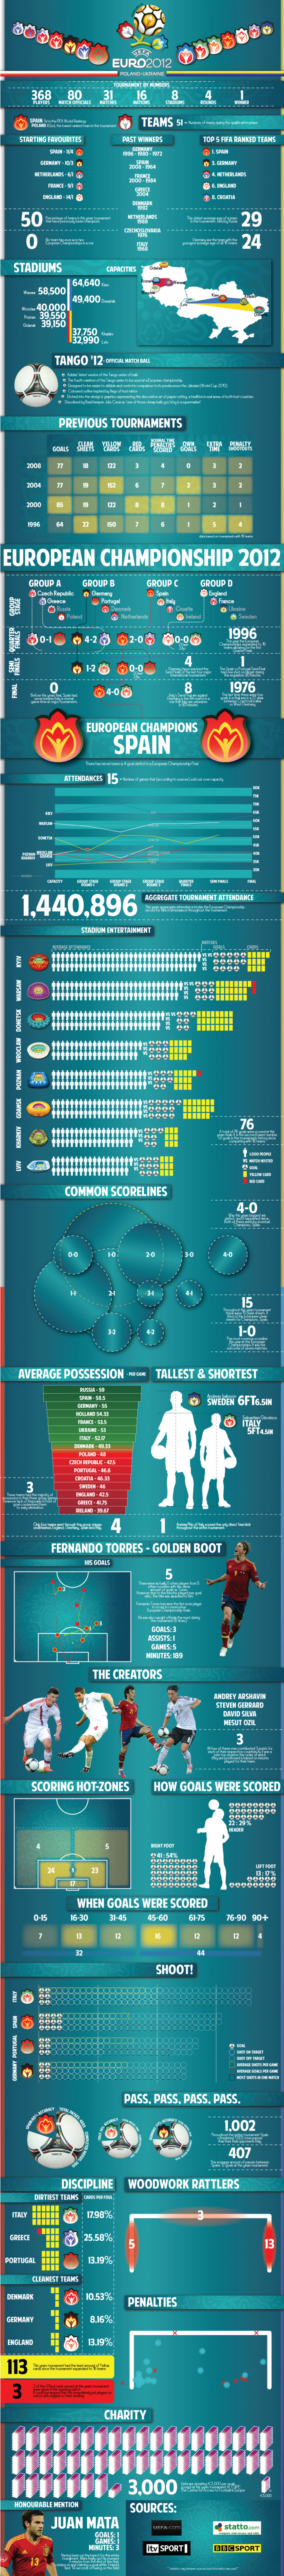 Euro 2012 Statistical Review Infographic